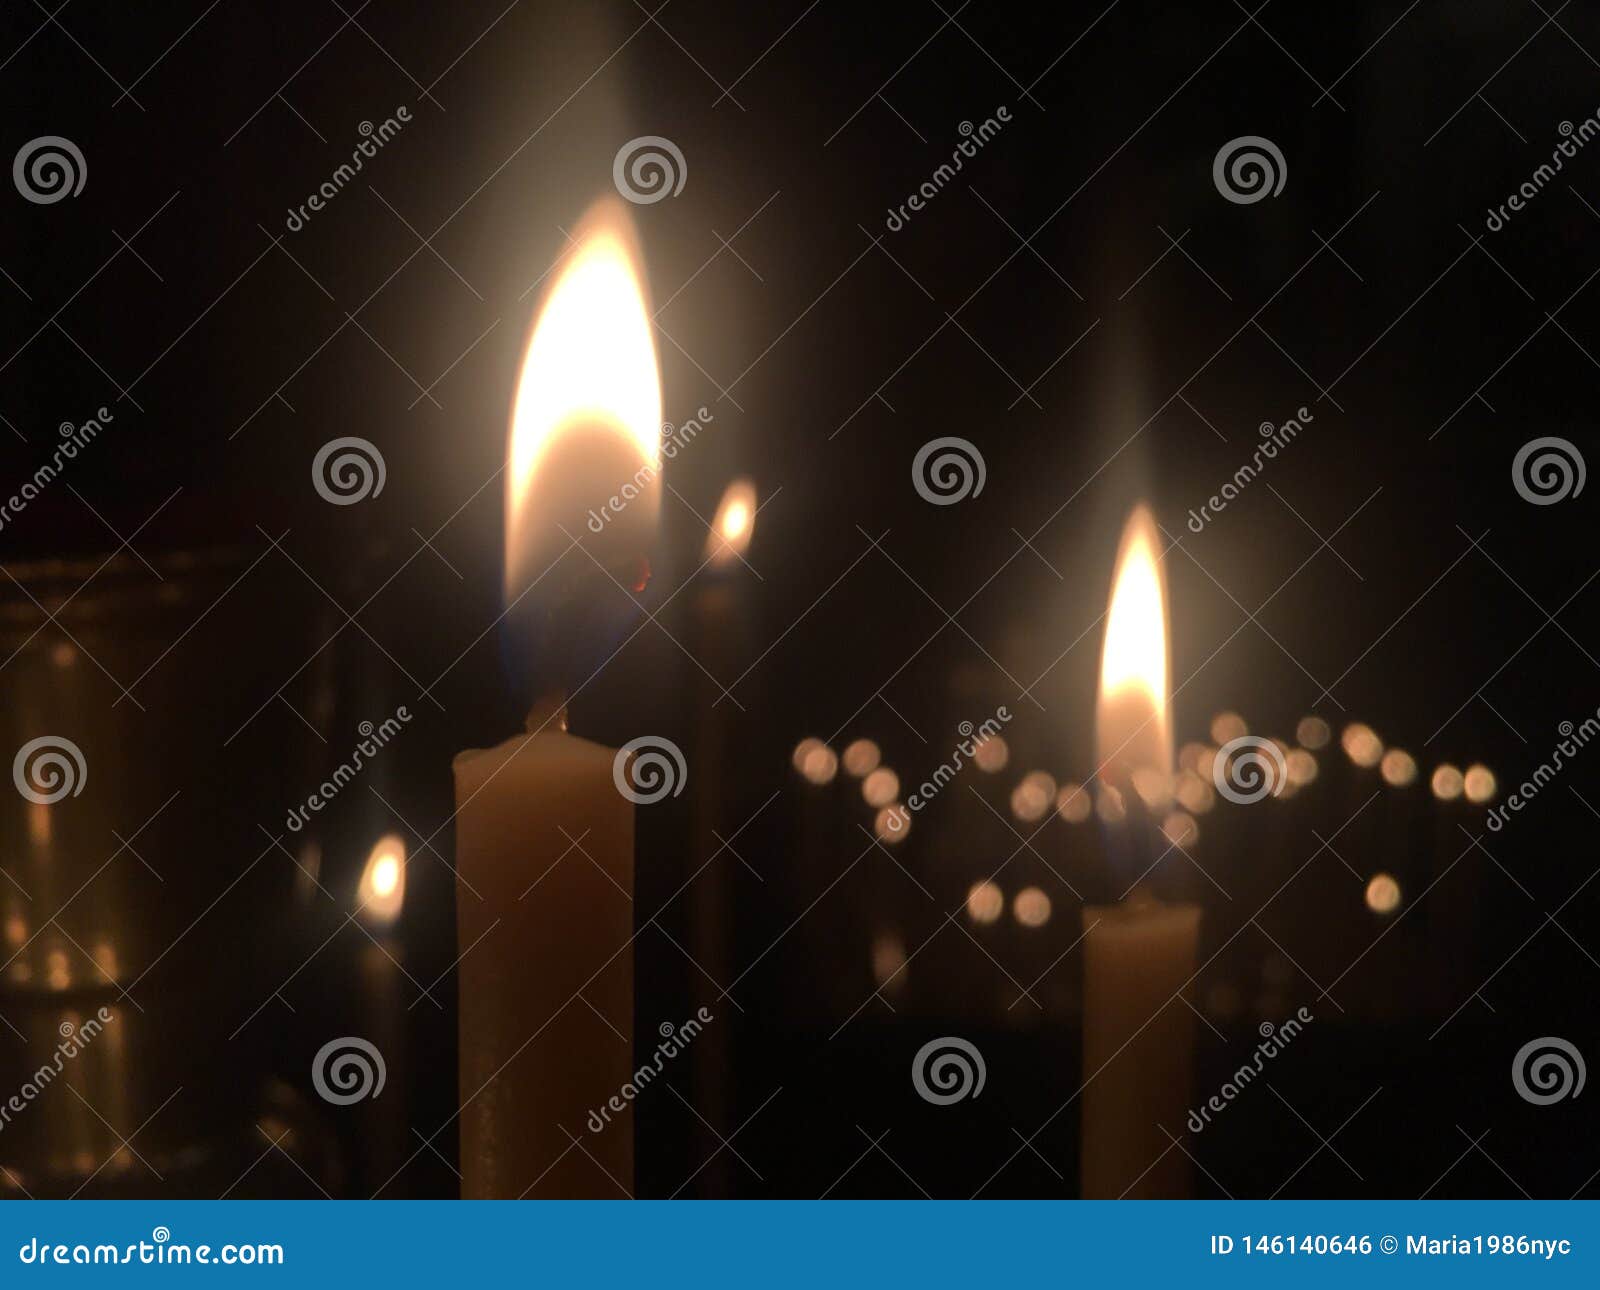 Candles Burning in Orthodox Christian Church during Easter Sunday ...